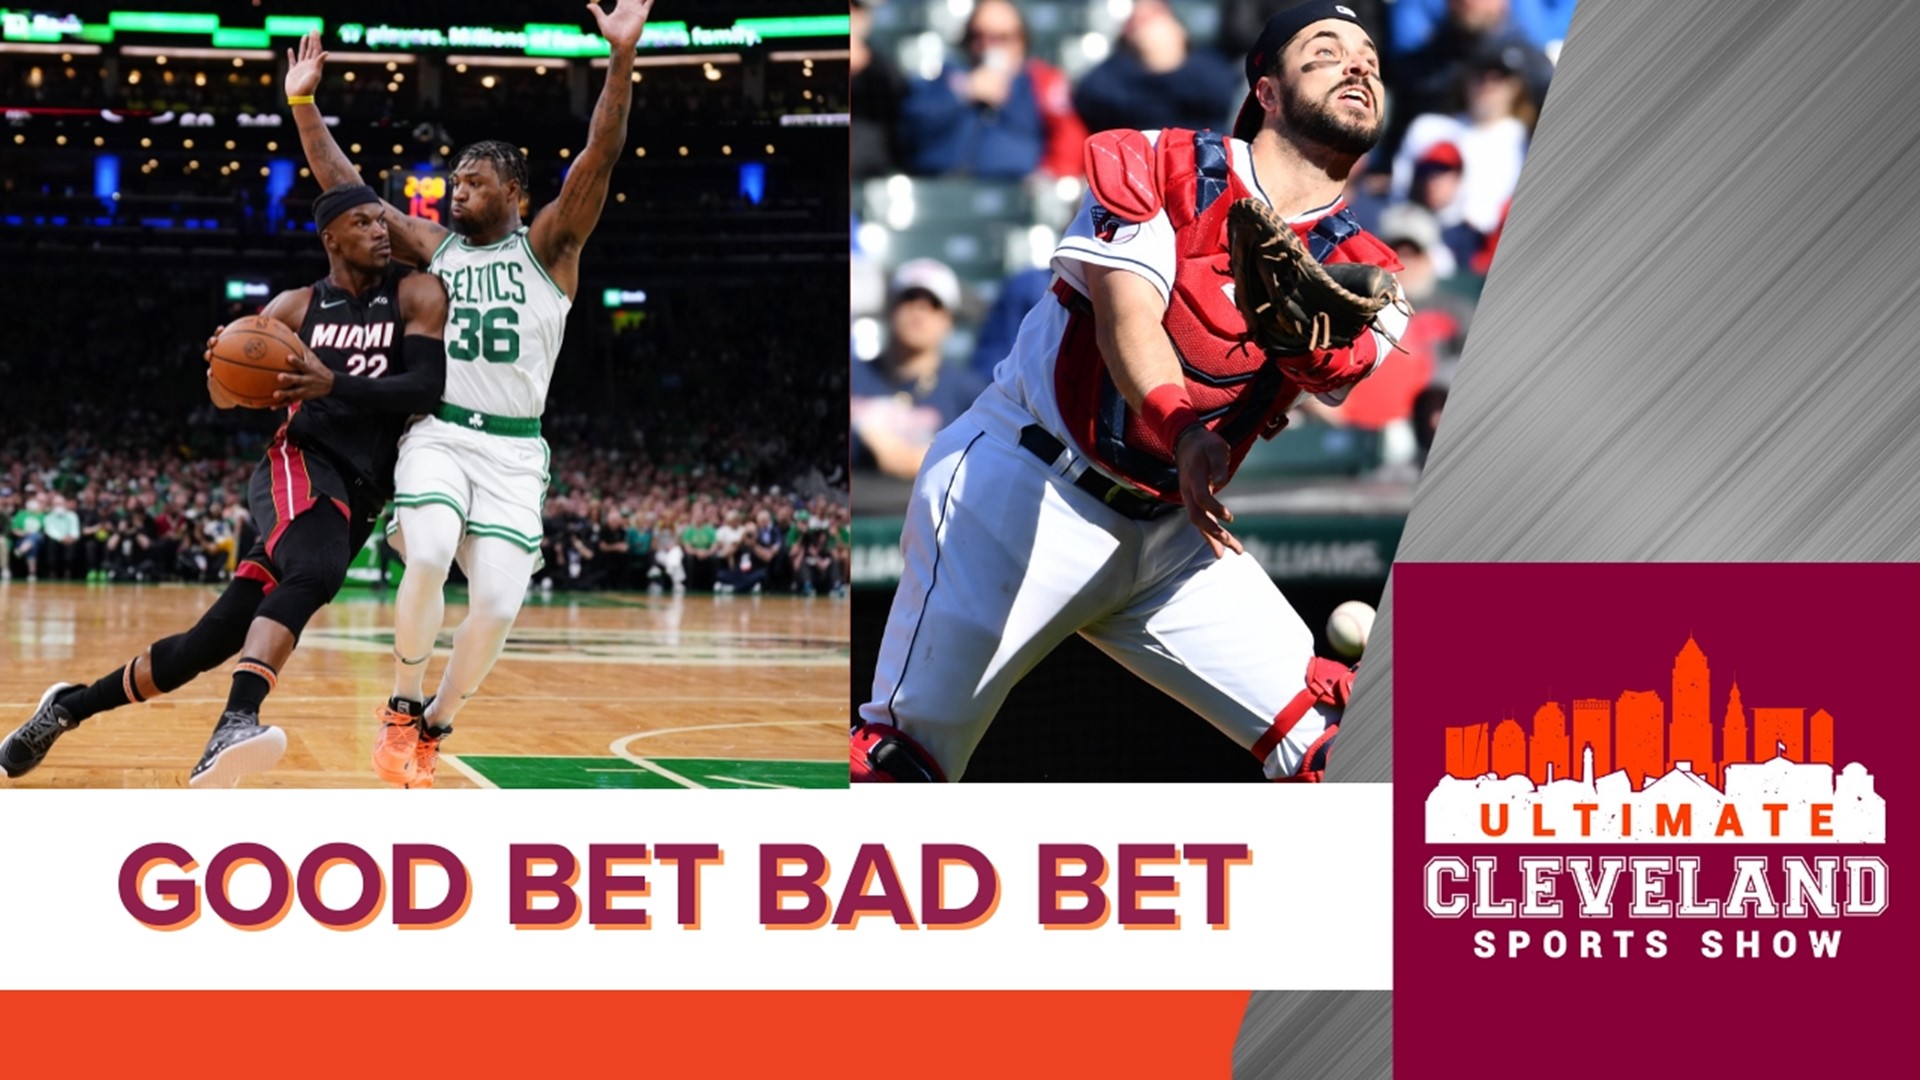 Guardians vs. Astros, Will Austin Hedges hit a home run tonight? and Miami Heat vs. Boston Celtics (Tyler Hero not playing) who will win?